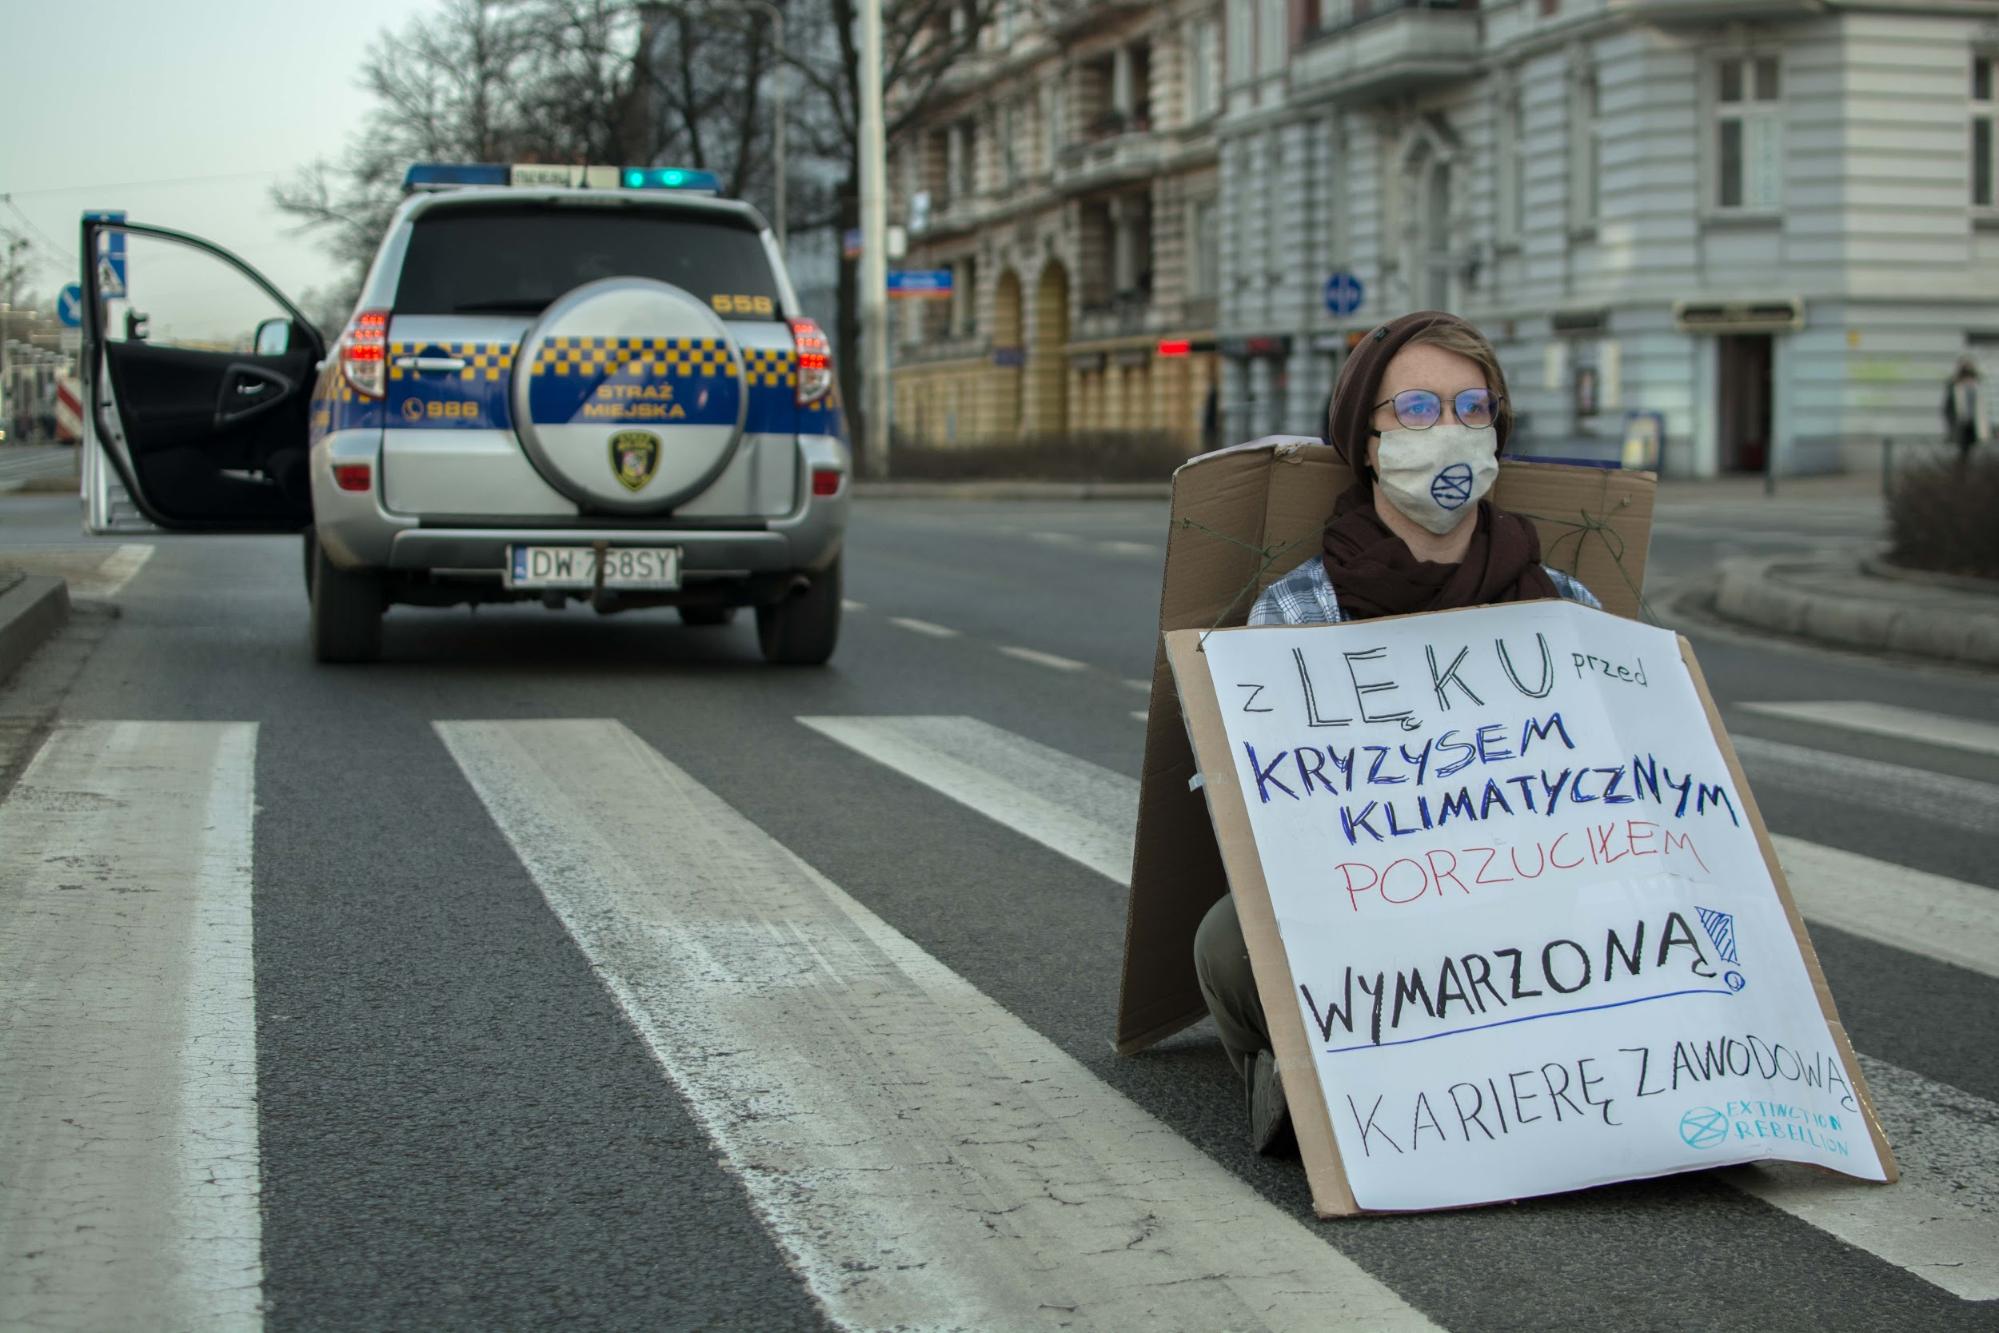 A Rebellion of One in Wrocław. Lone rebels (with hidden support teams) blocked roads across Poland. The banner: ‘Climate crisis fears made me drop my dream career’. Photo: cyjon & Alicja Kozuchowska